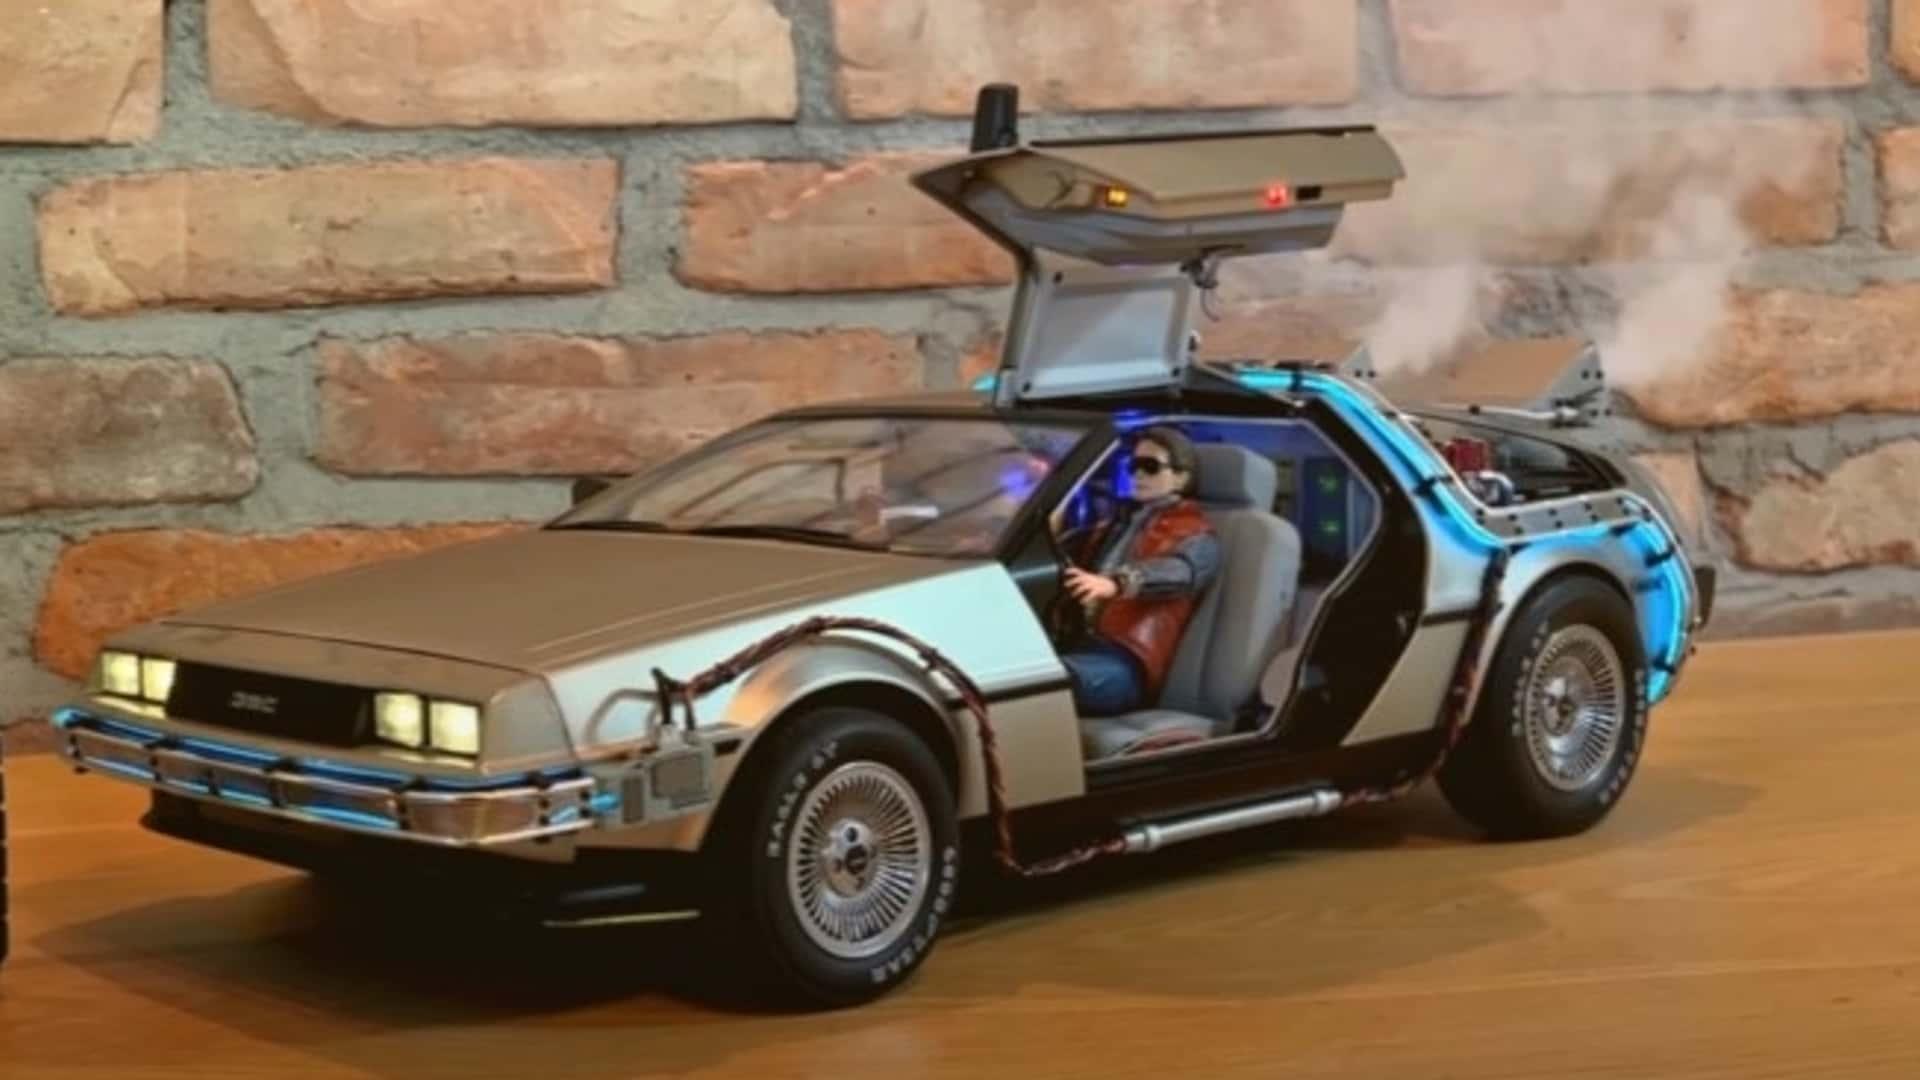 Delorean Rc Car:  The DeLorean RC Car: A Must-Have for Fans and Collectors.